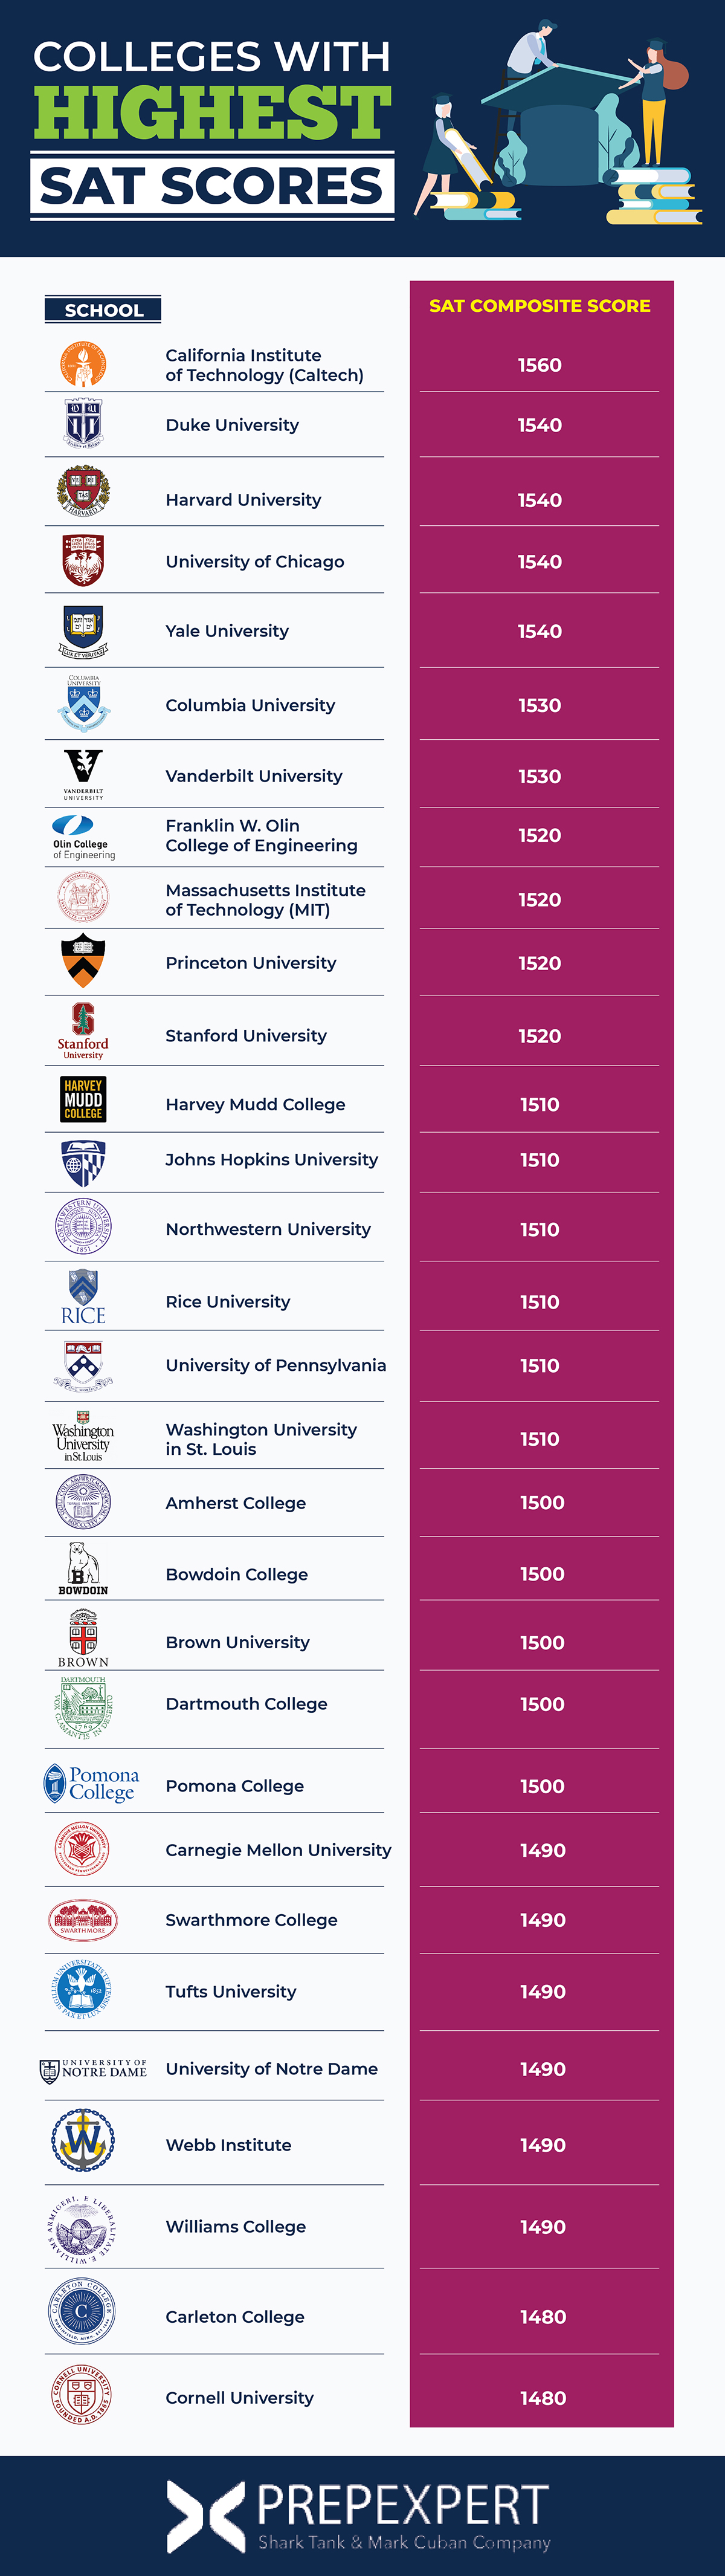 colleges with highest sat scores